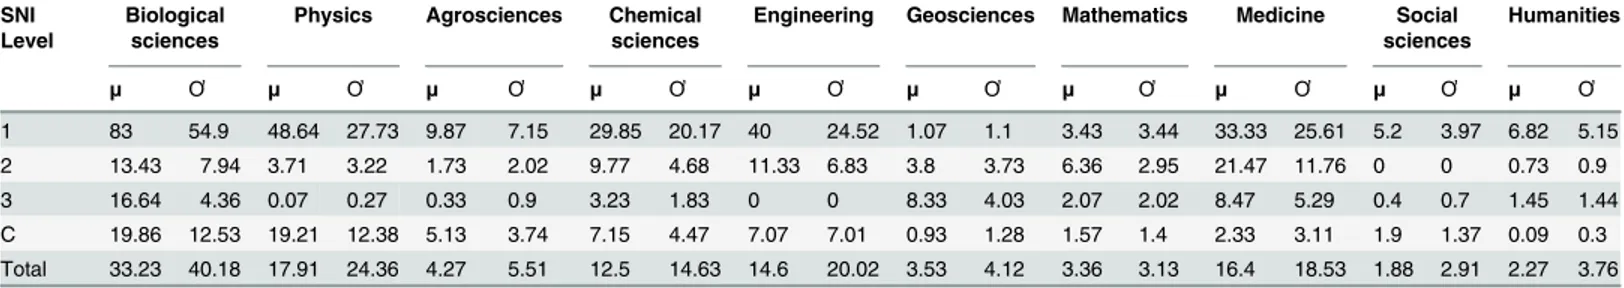 Table 13. Distribution of means (μ) and standard deviations ( Ơ ) of papers published by each level of researchers in the SNI system by area of knowledge.